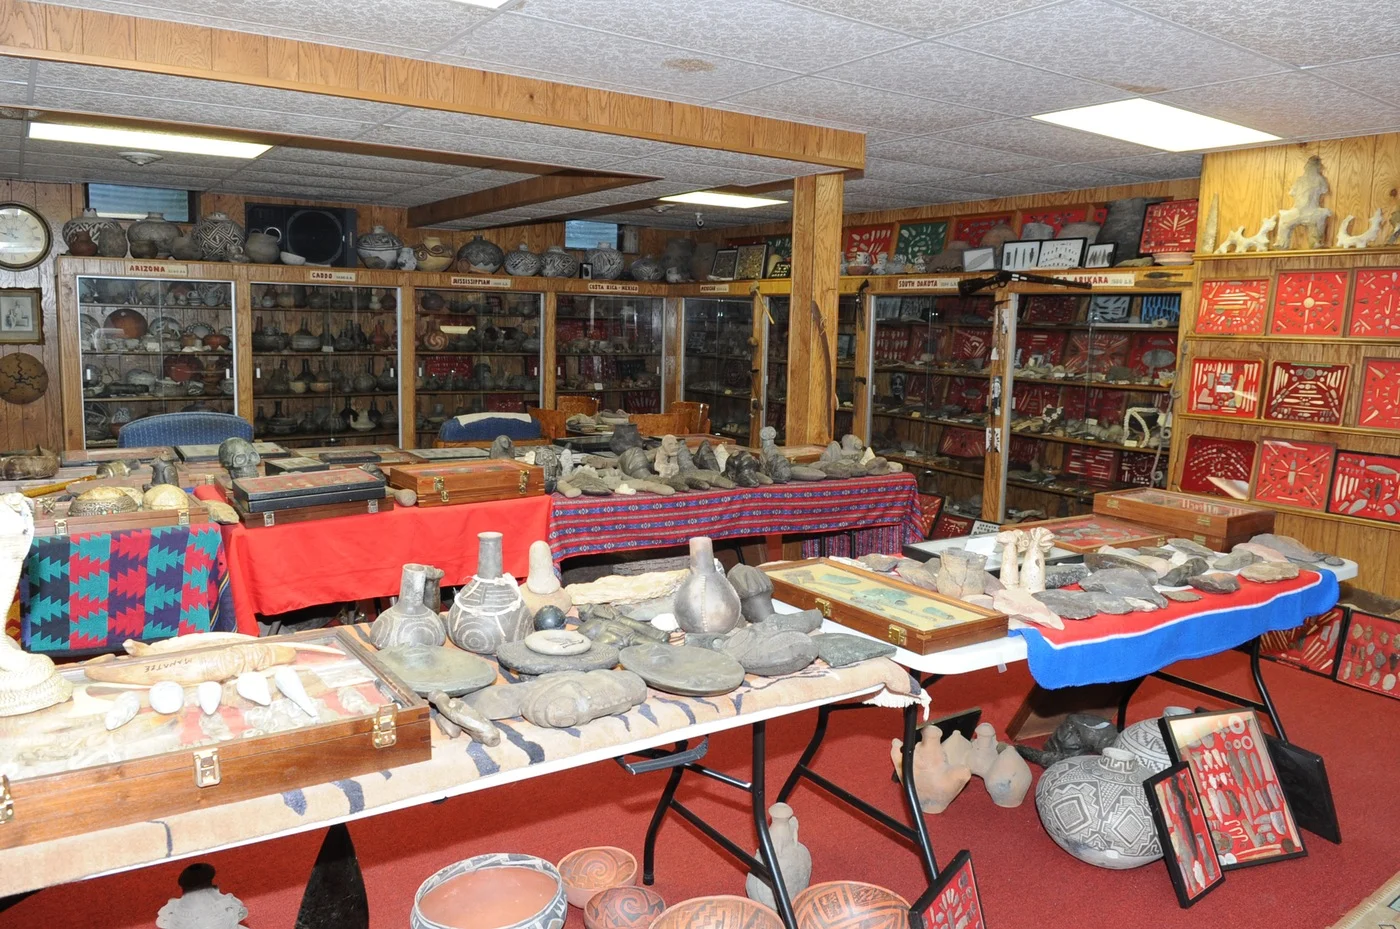 Cultural artifacts from North America, South America, Asia, the Caribbean, and in Indo-Pacific regions fill a room.